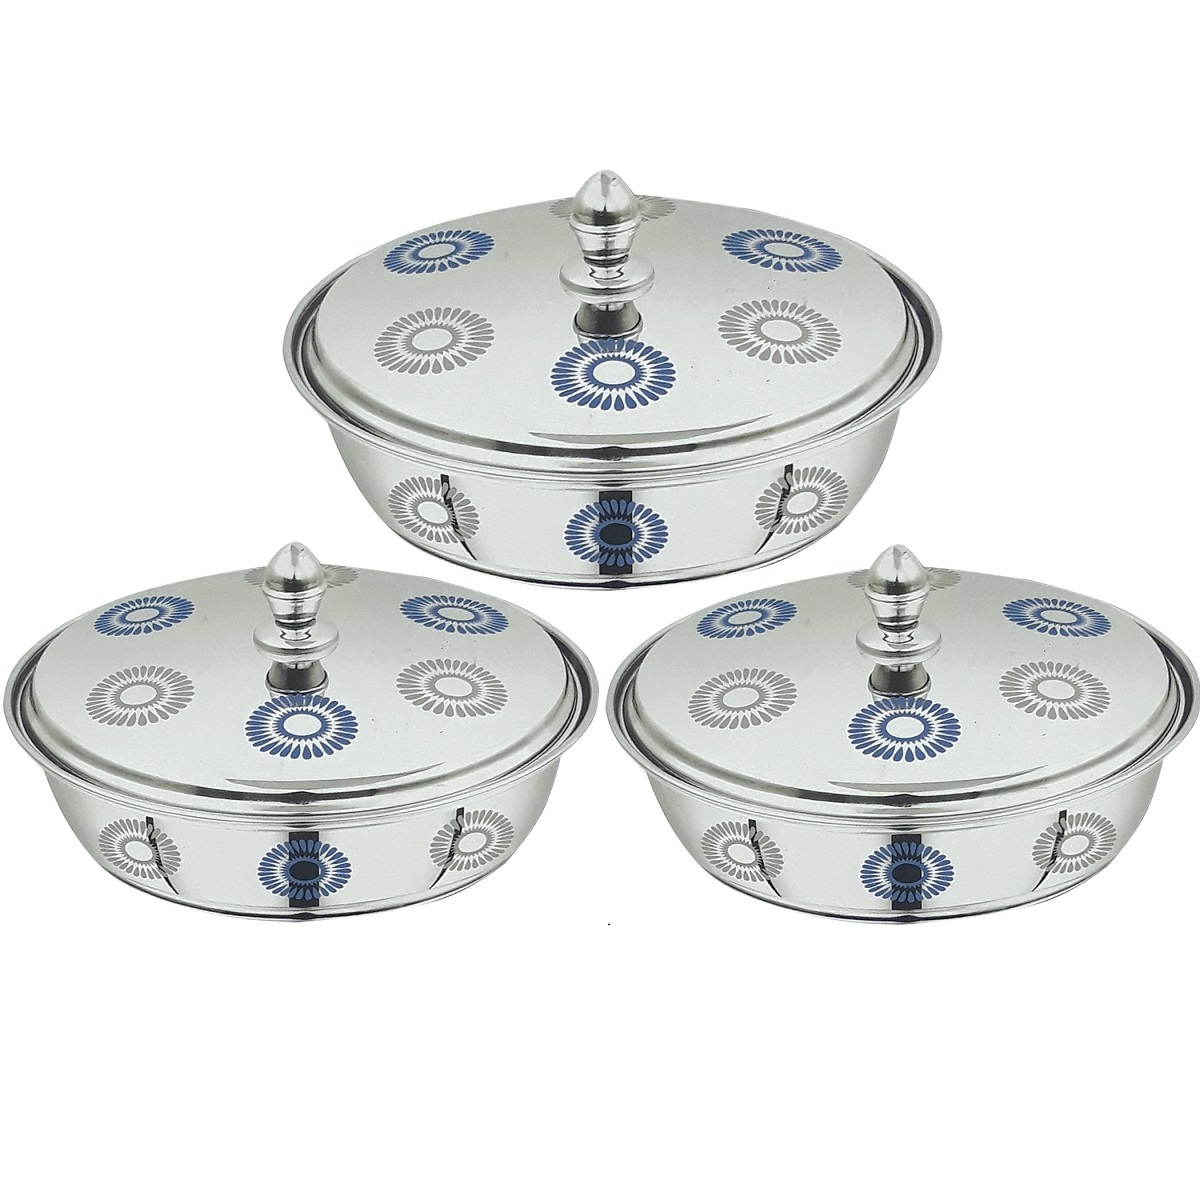 Chefline Floral Dish With Stainless Steel Lid 3Pc